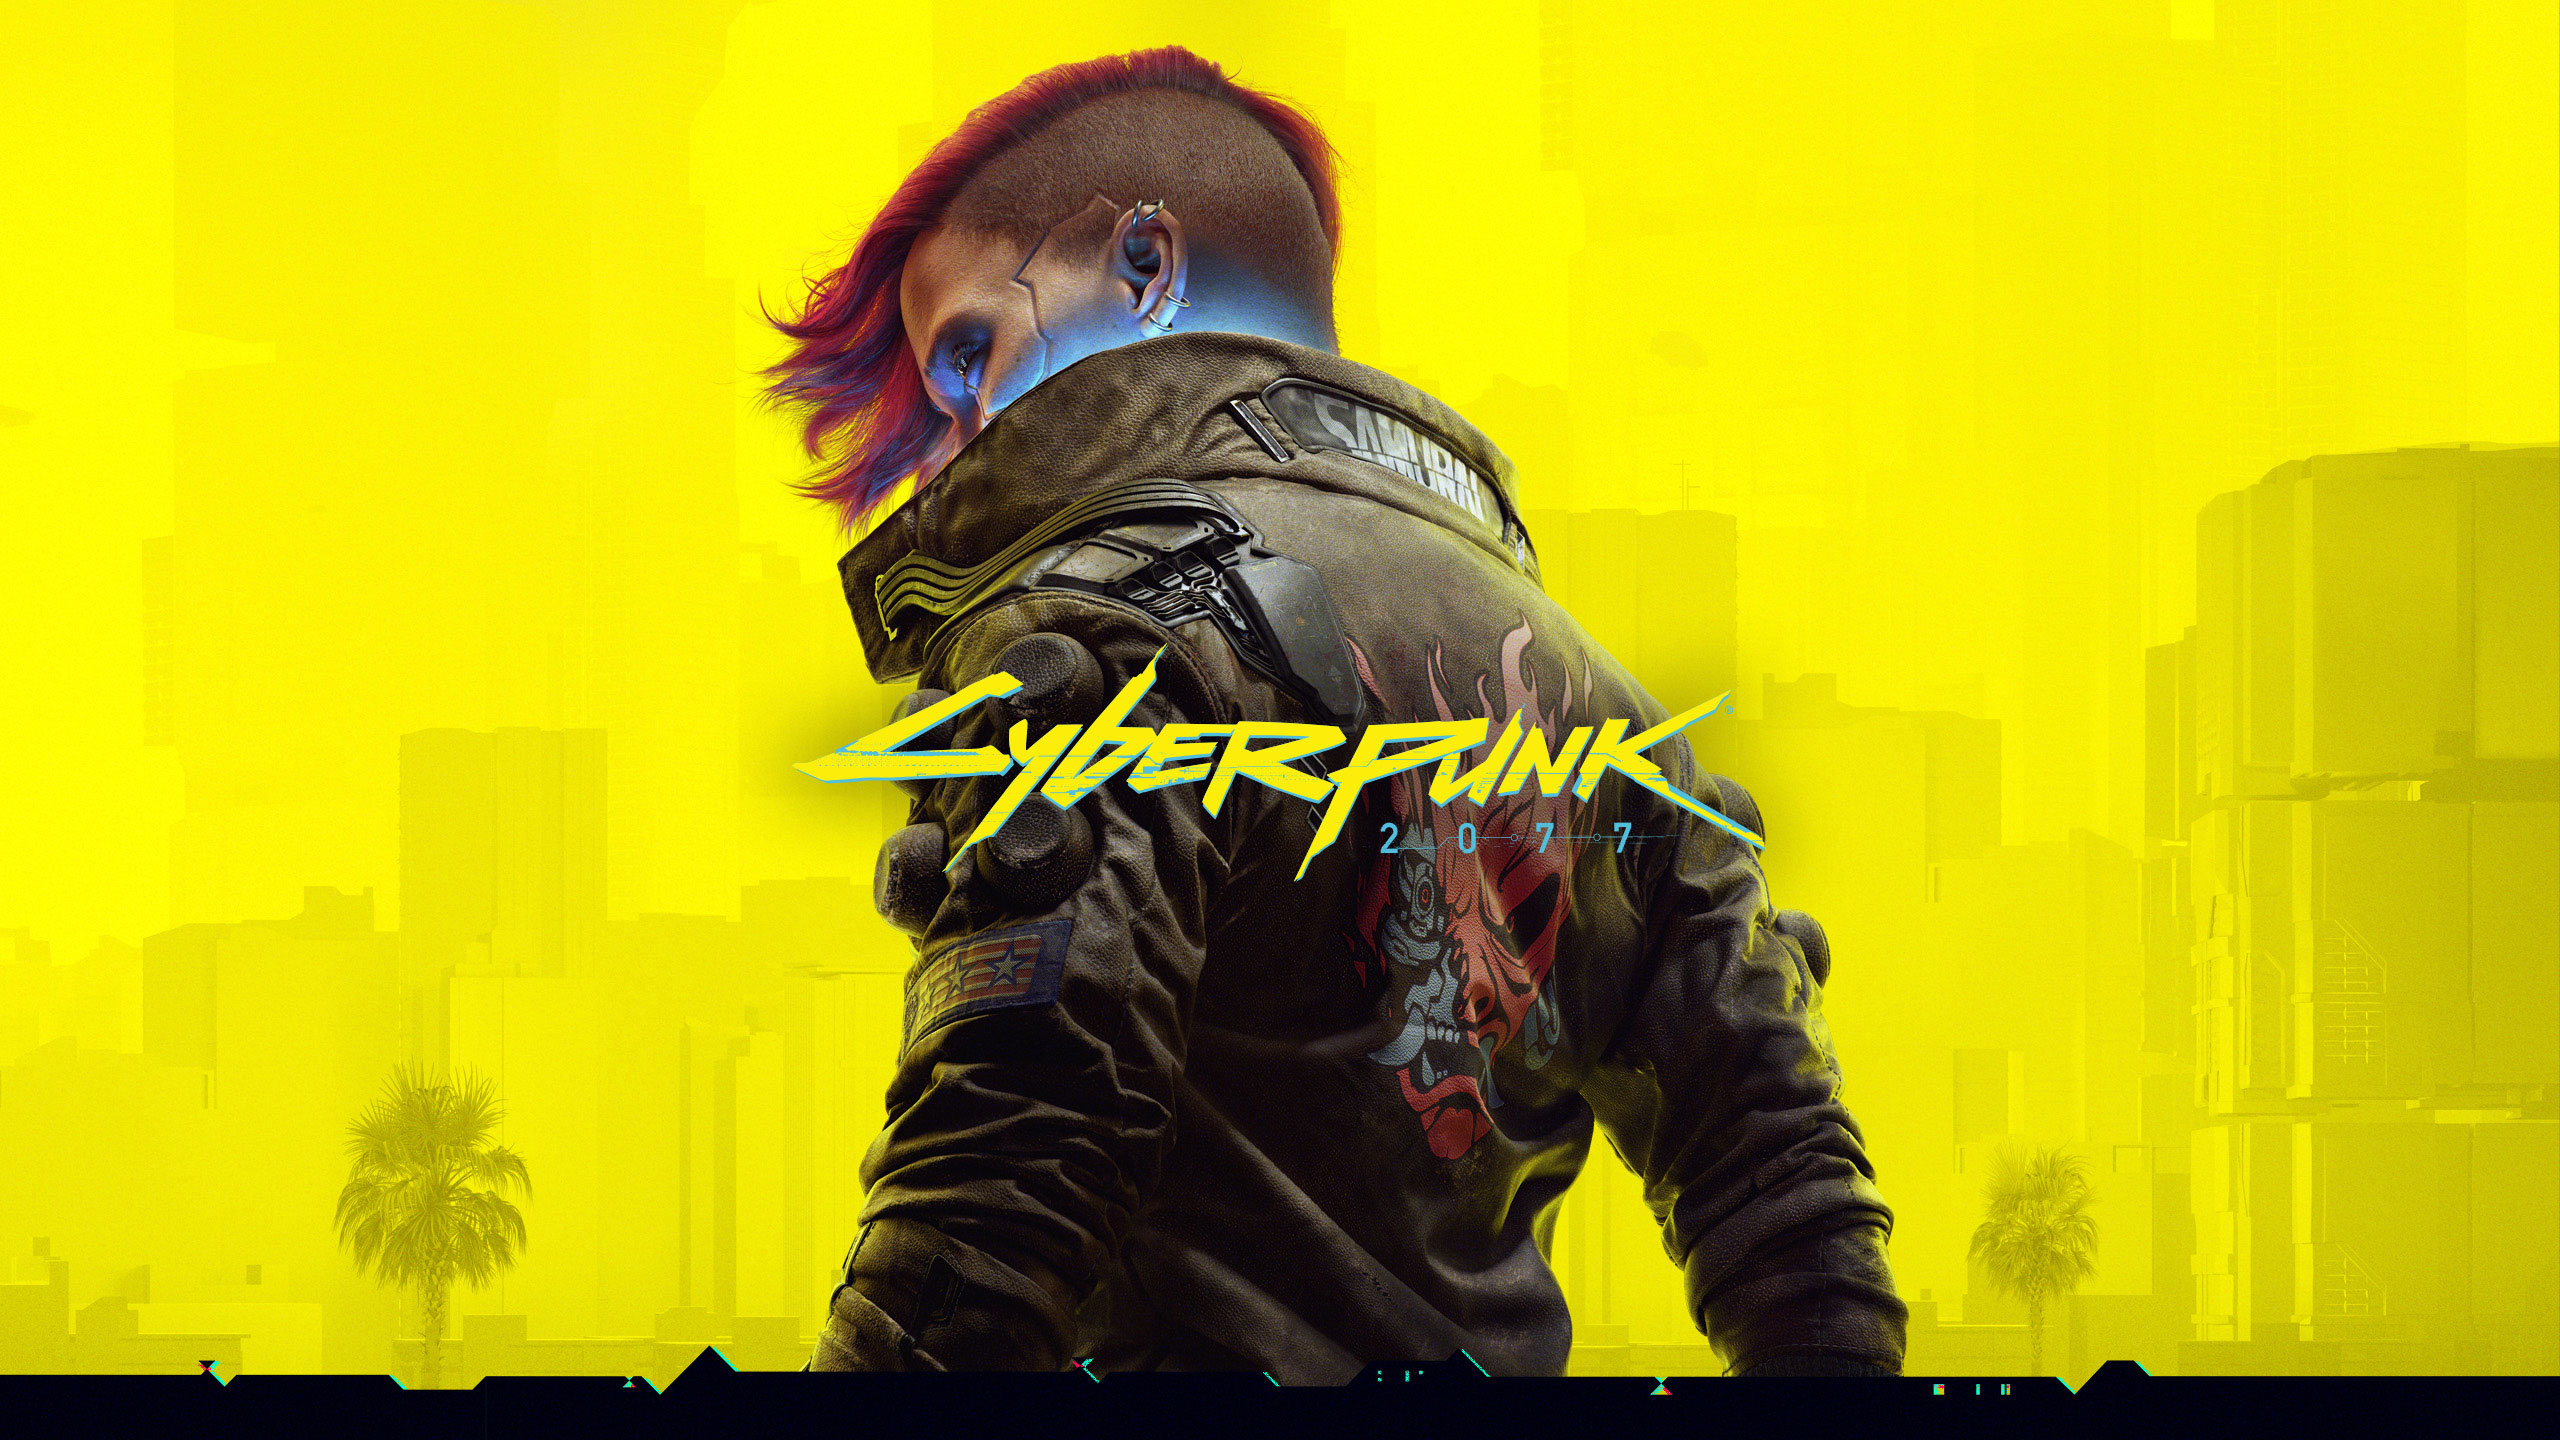 A promotional image for Cyberpunk 2077, a video game. The image shows a woman with half of her head shaved, wearing a futuristic leather jacket. The jacket has an Oni face depicted on it which is half Oni / half cyborg.